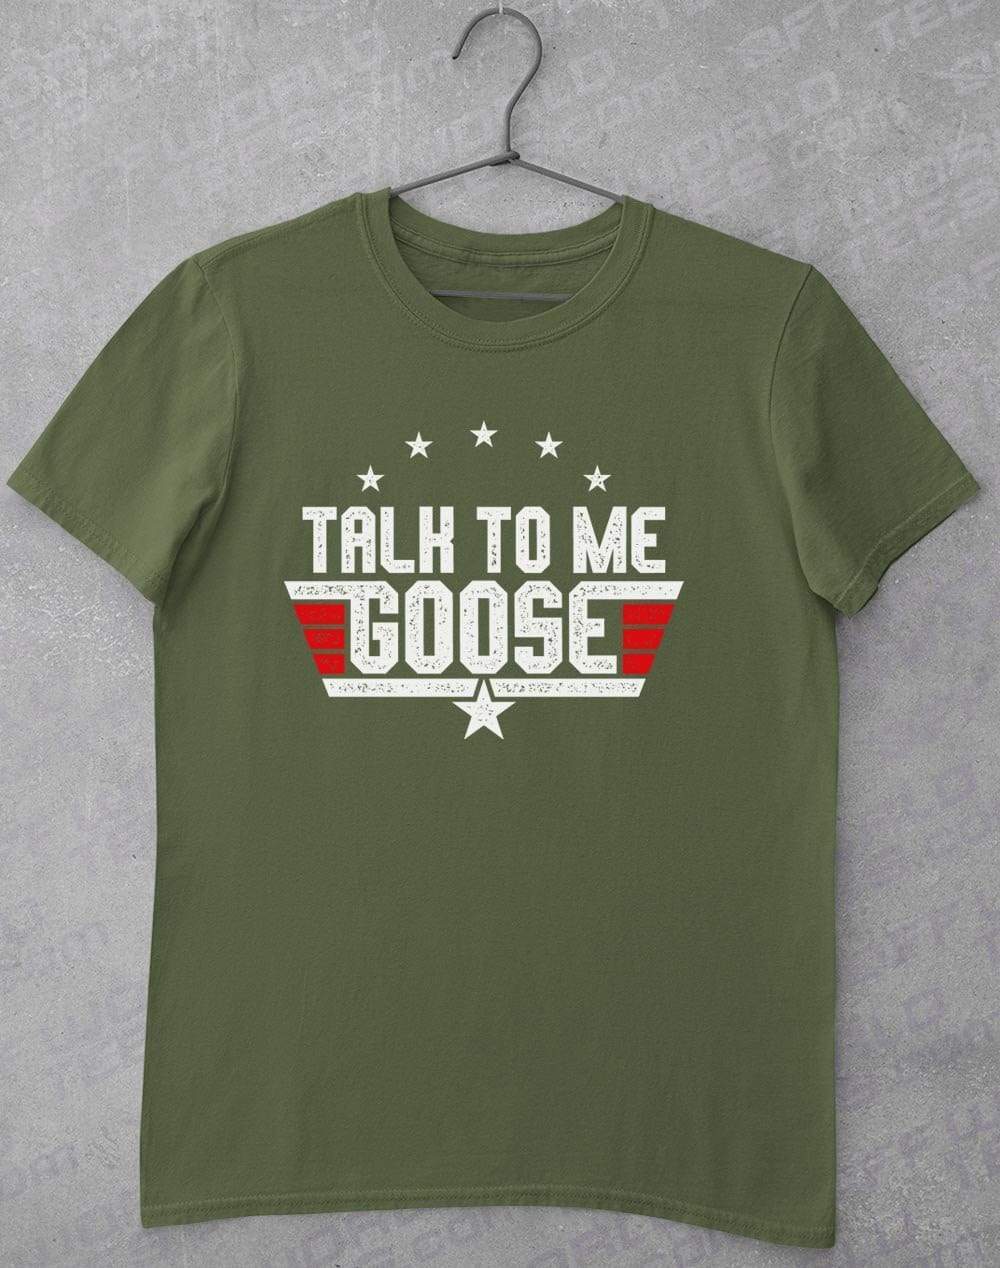 Talk to Me Goose T-Shirt S / Military Green  - Off World Tees